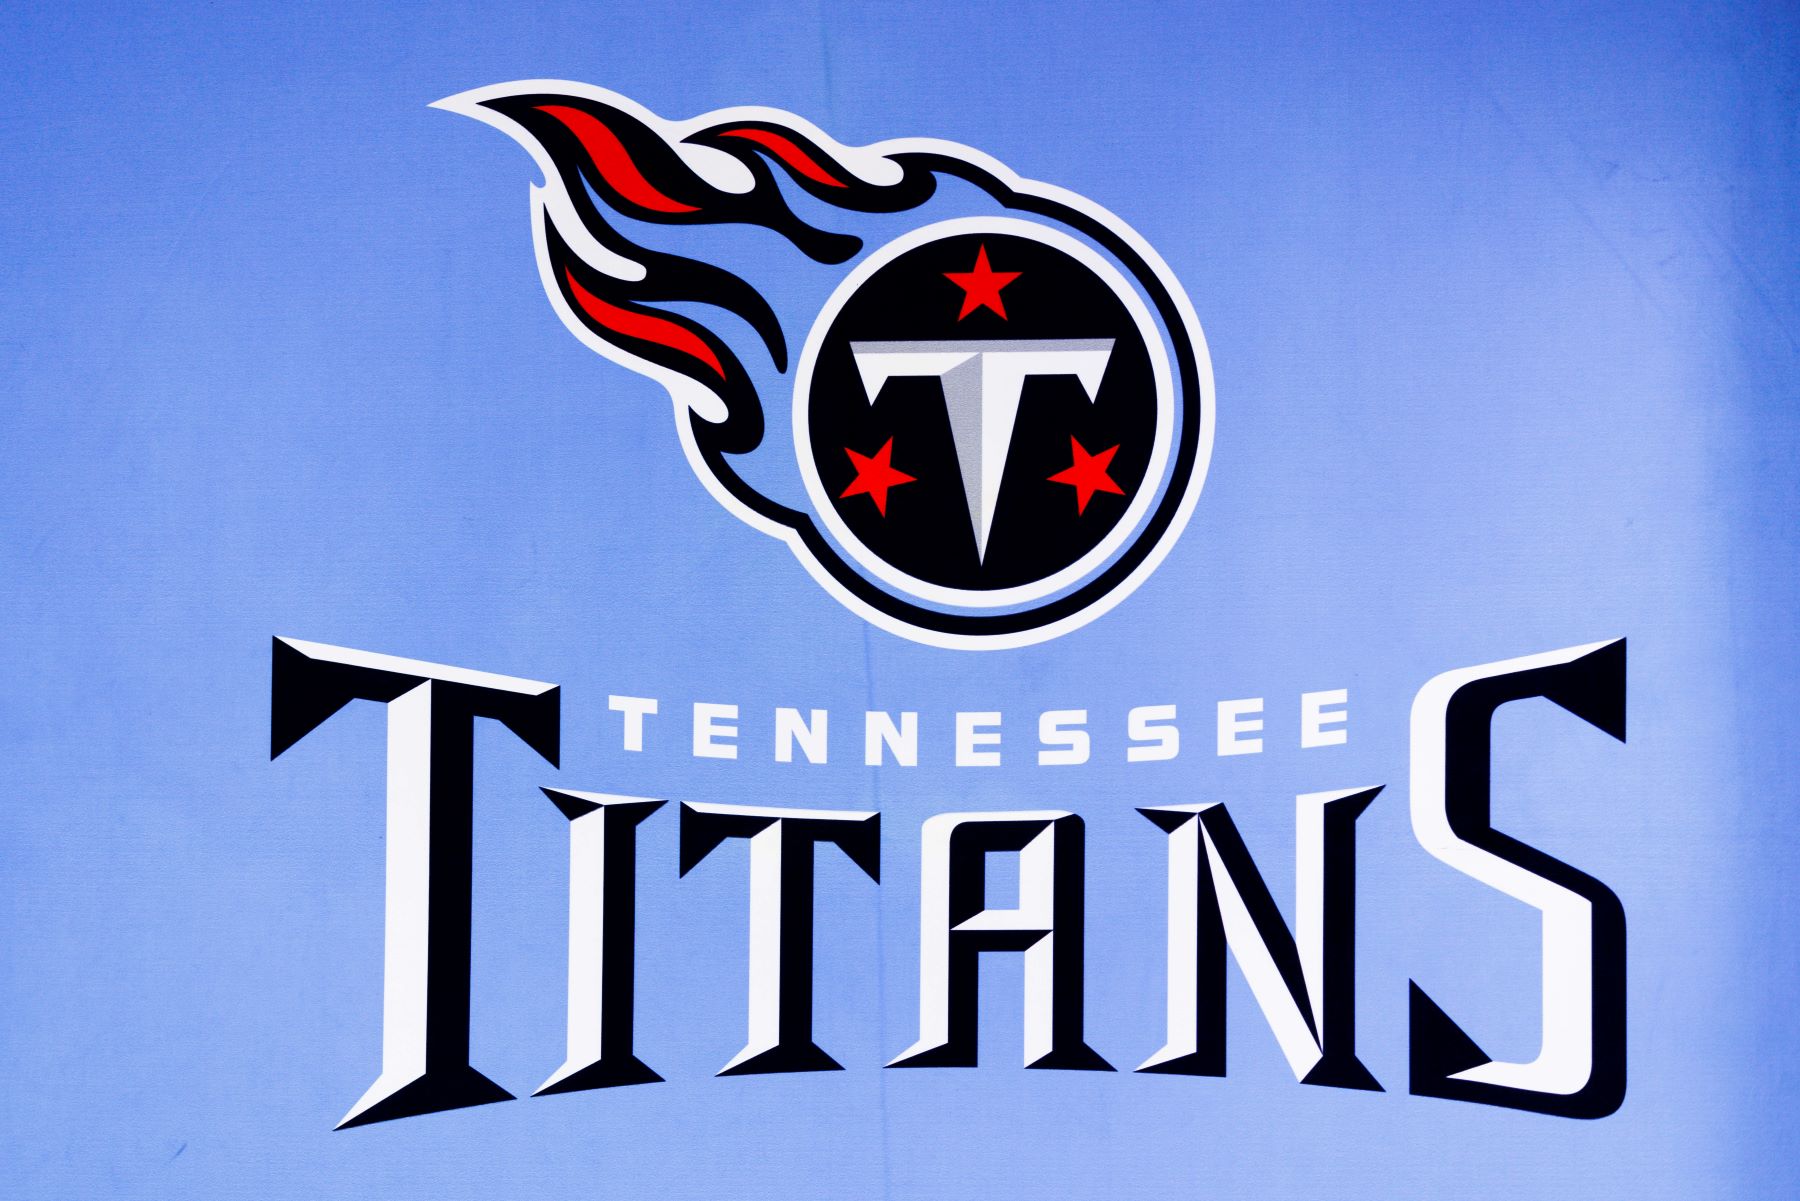 NFL team Tennessee Titans logo seen at the Los Angeles Convention Center during the Super Bowl Experience